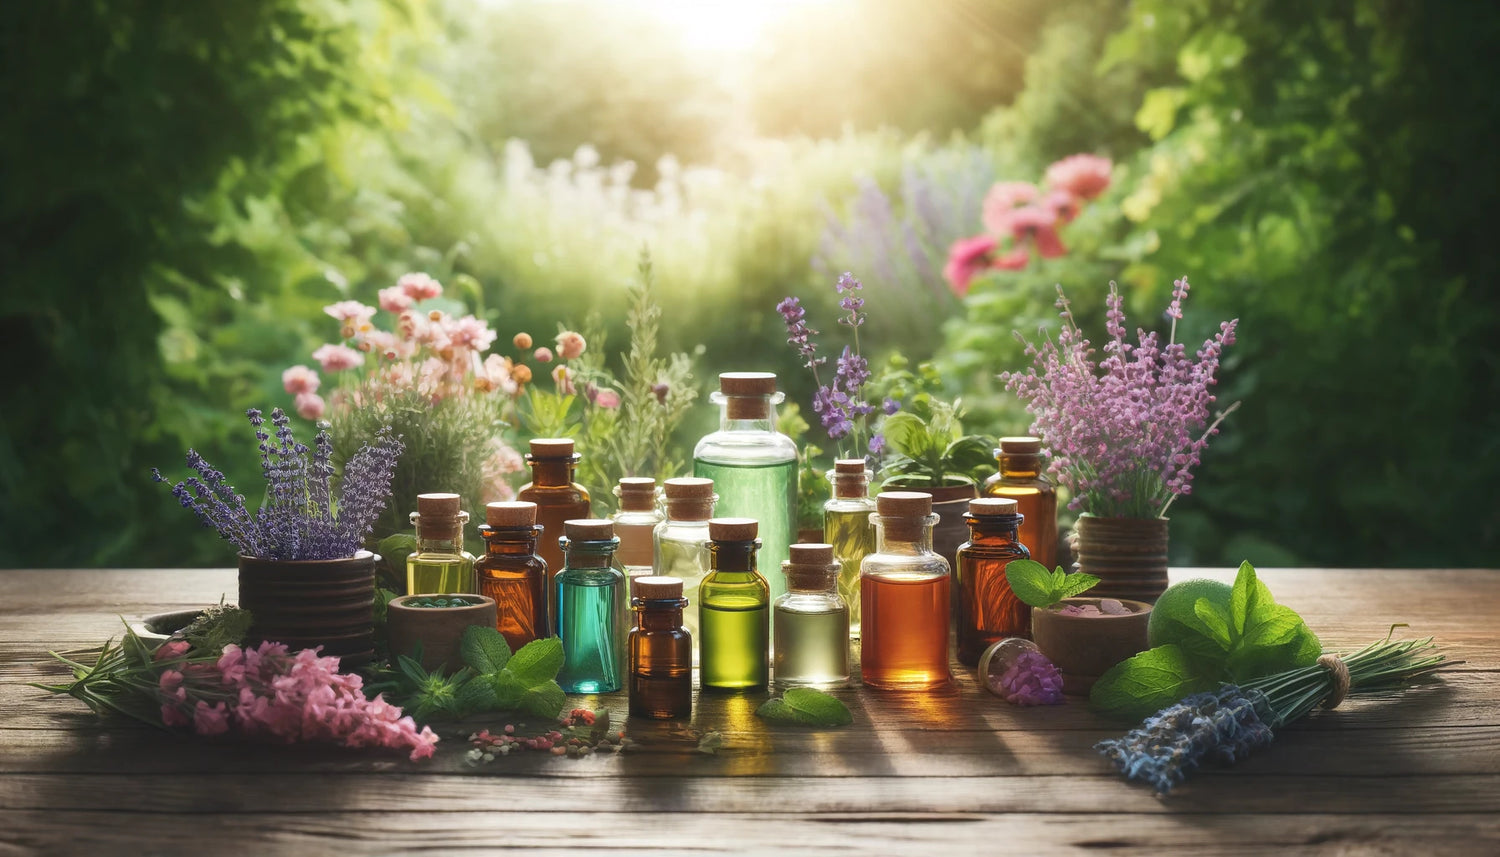 A beautiful landscape photo of a variety of essential oils, surrounded by flowers with a green landscape in the background.